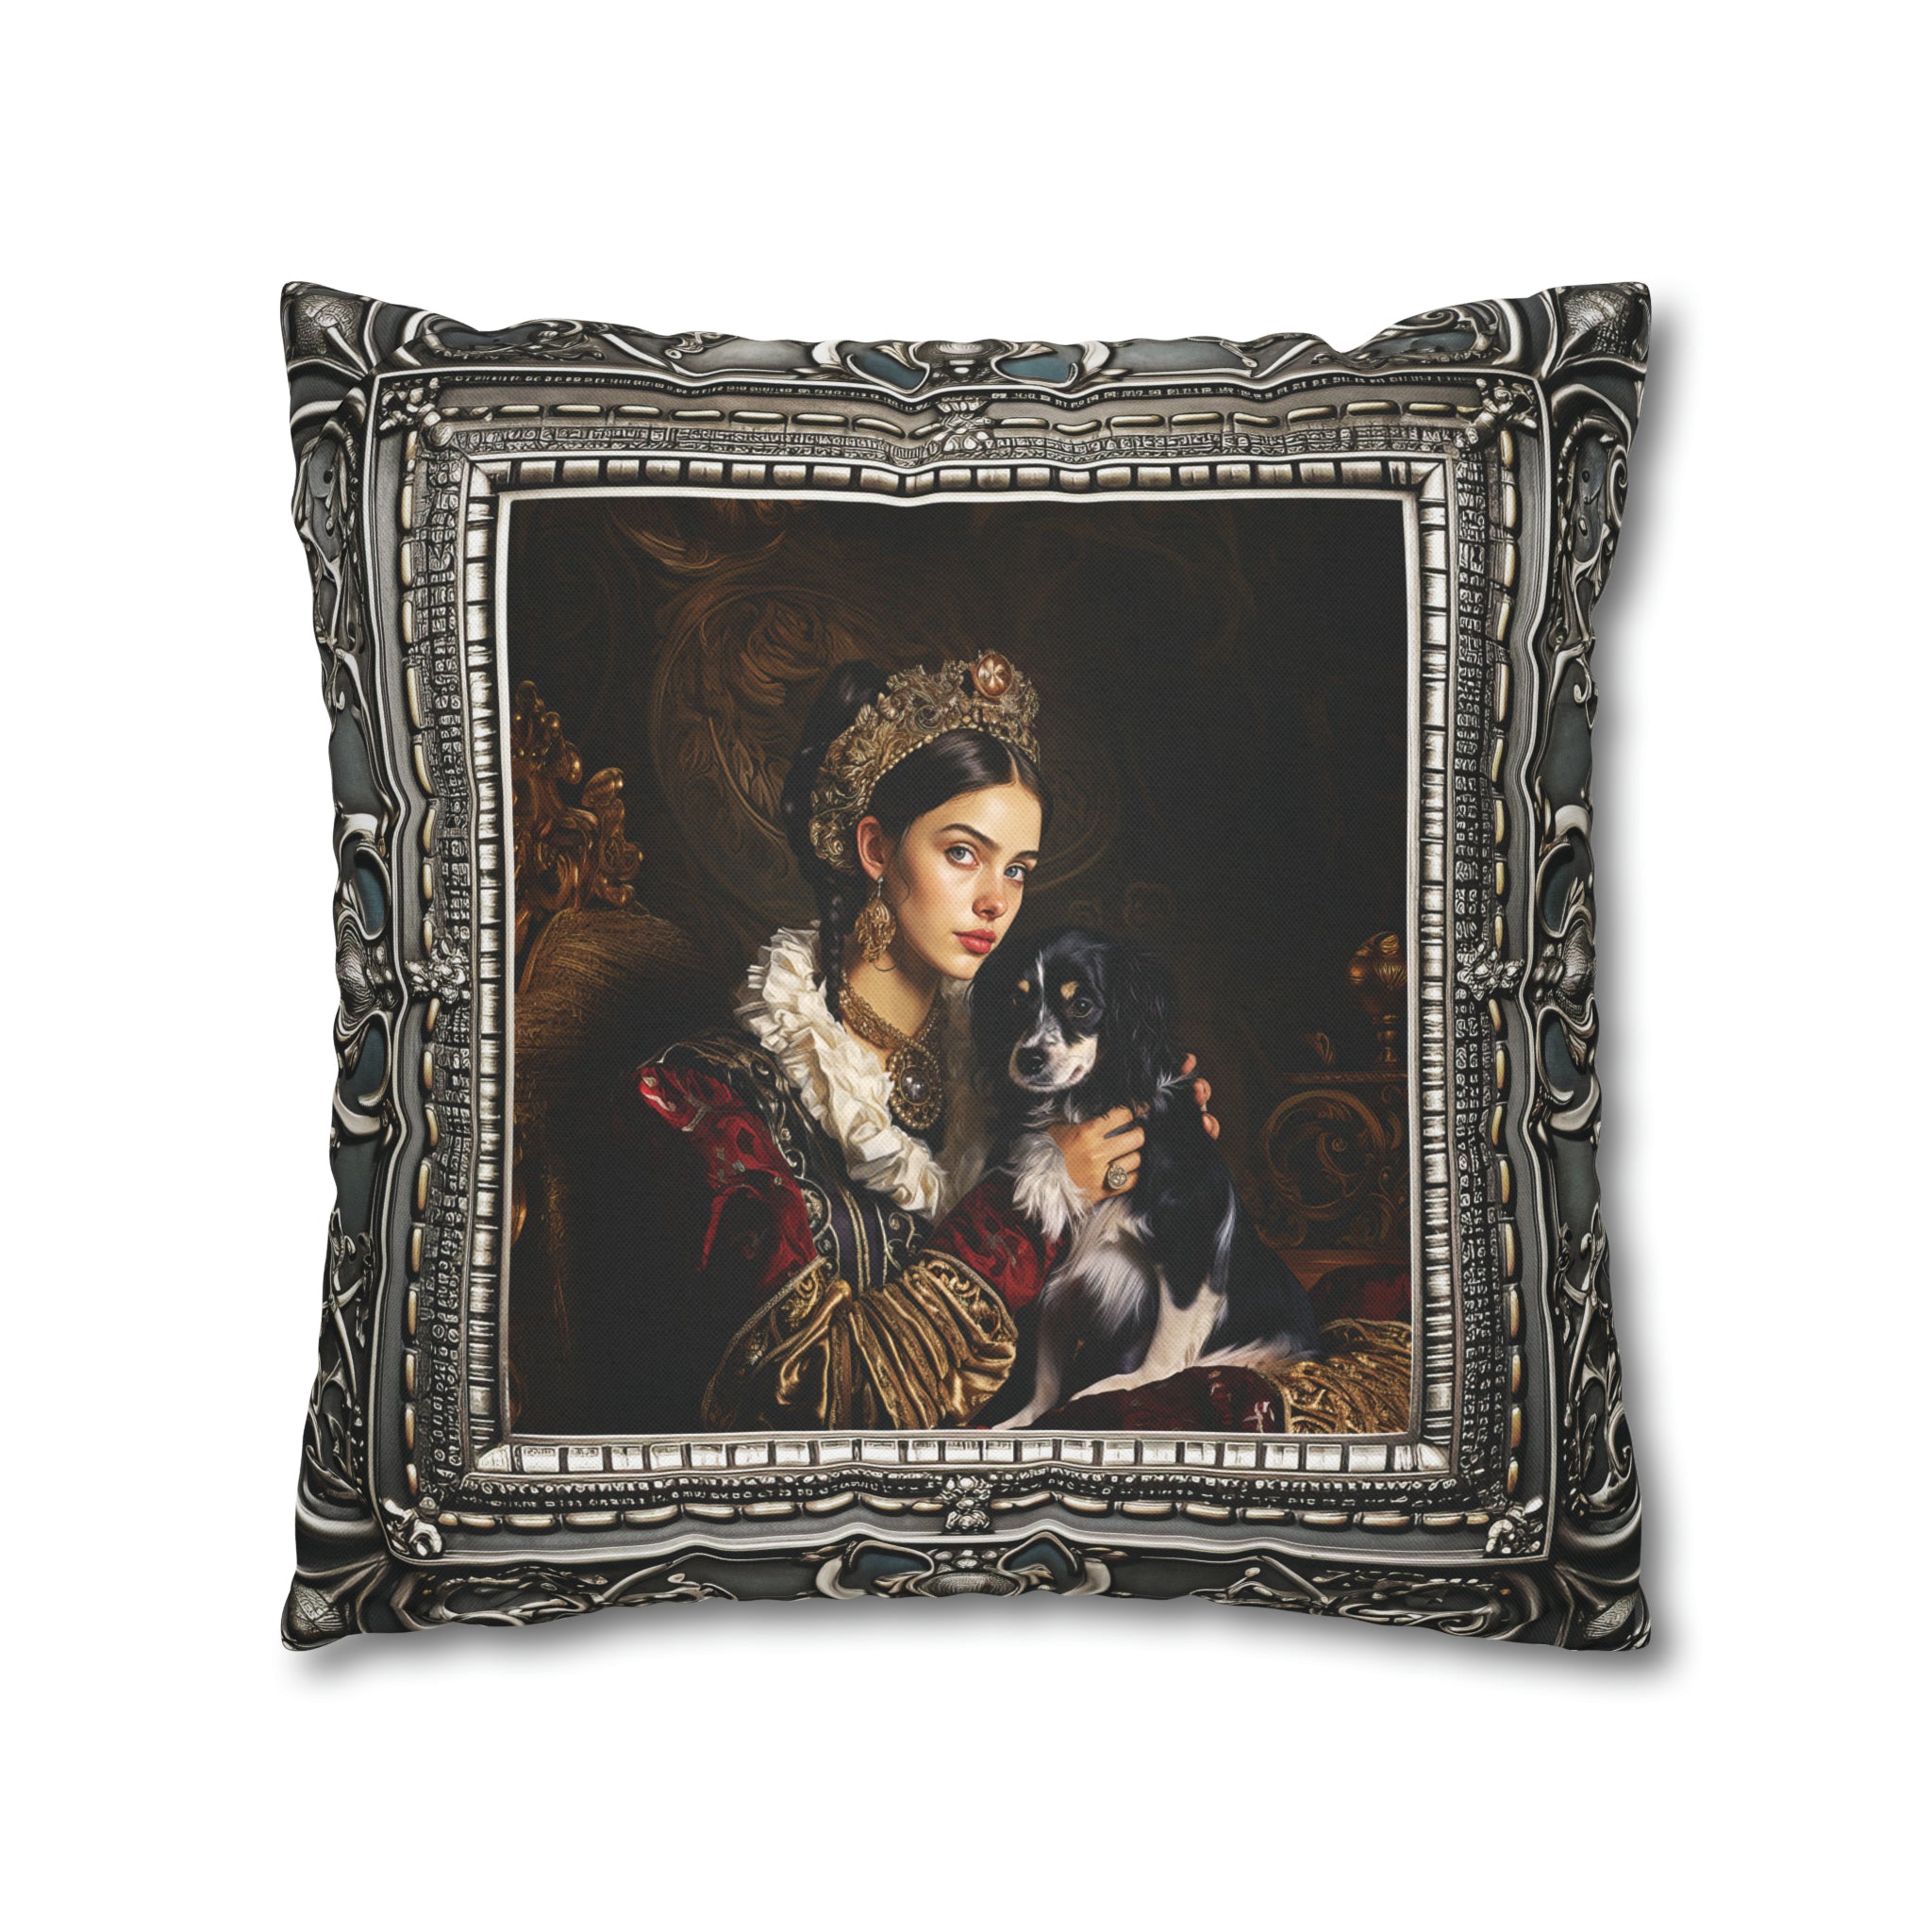 Square Pillow Case 18" x 18", CASE ONLY, no pillow form, original Art ,a Painting of Nobleman's Daughter with her Dog Antique Frame